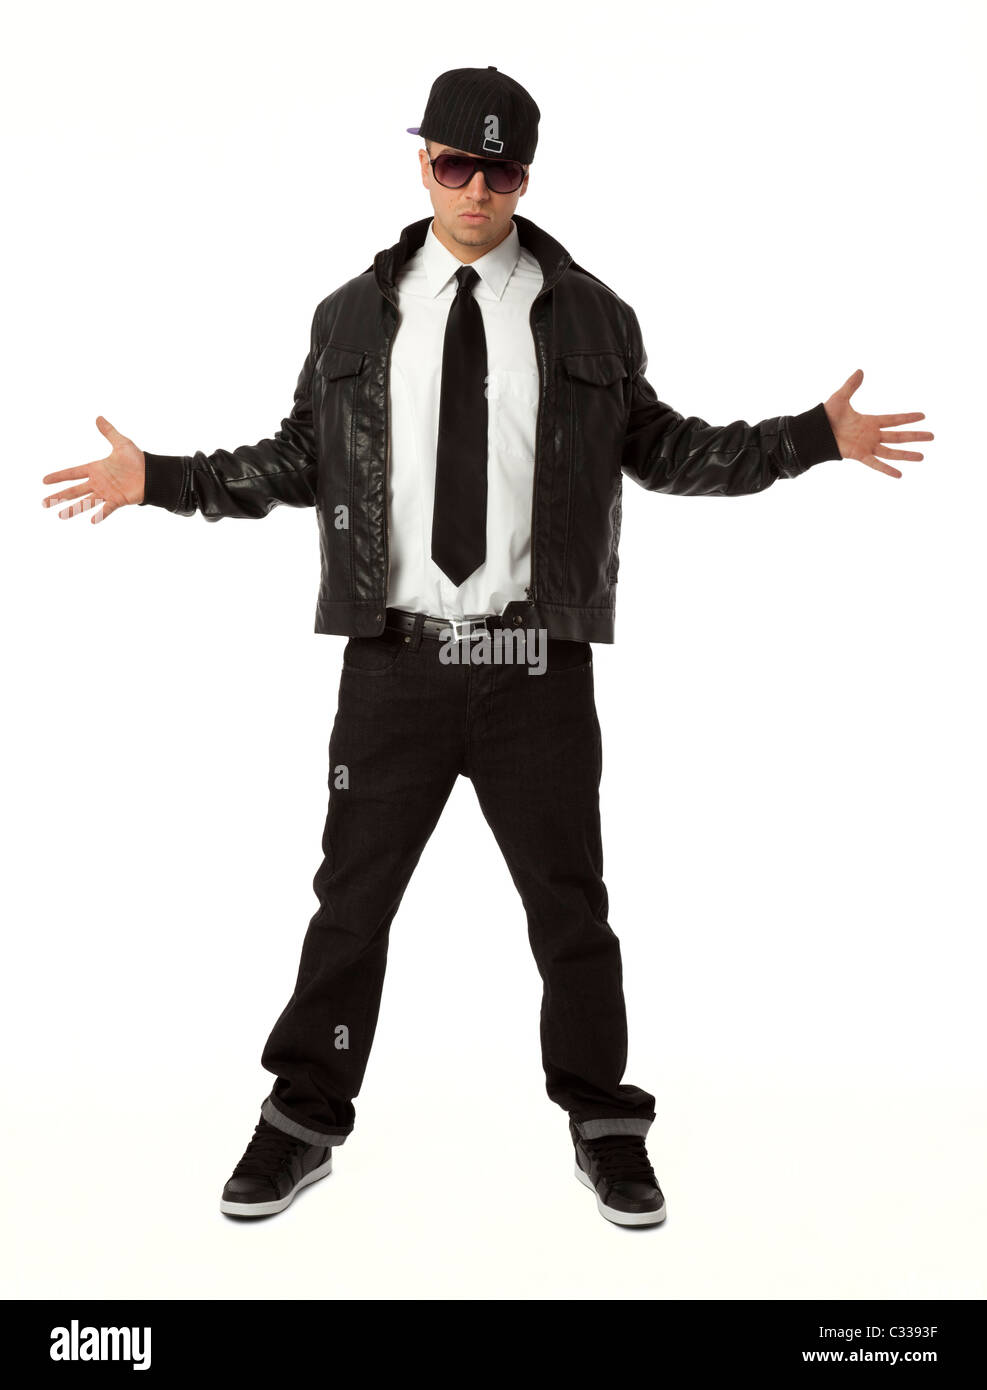 Full length front view of young adult hip hop male on white background. Stock Photo